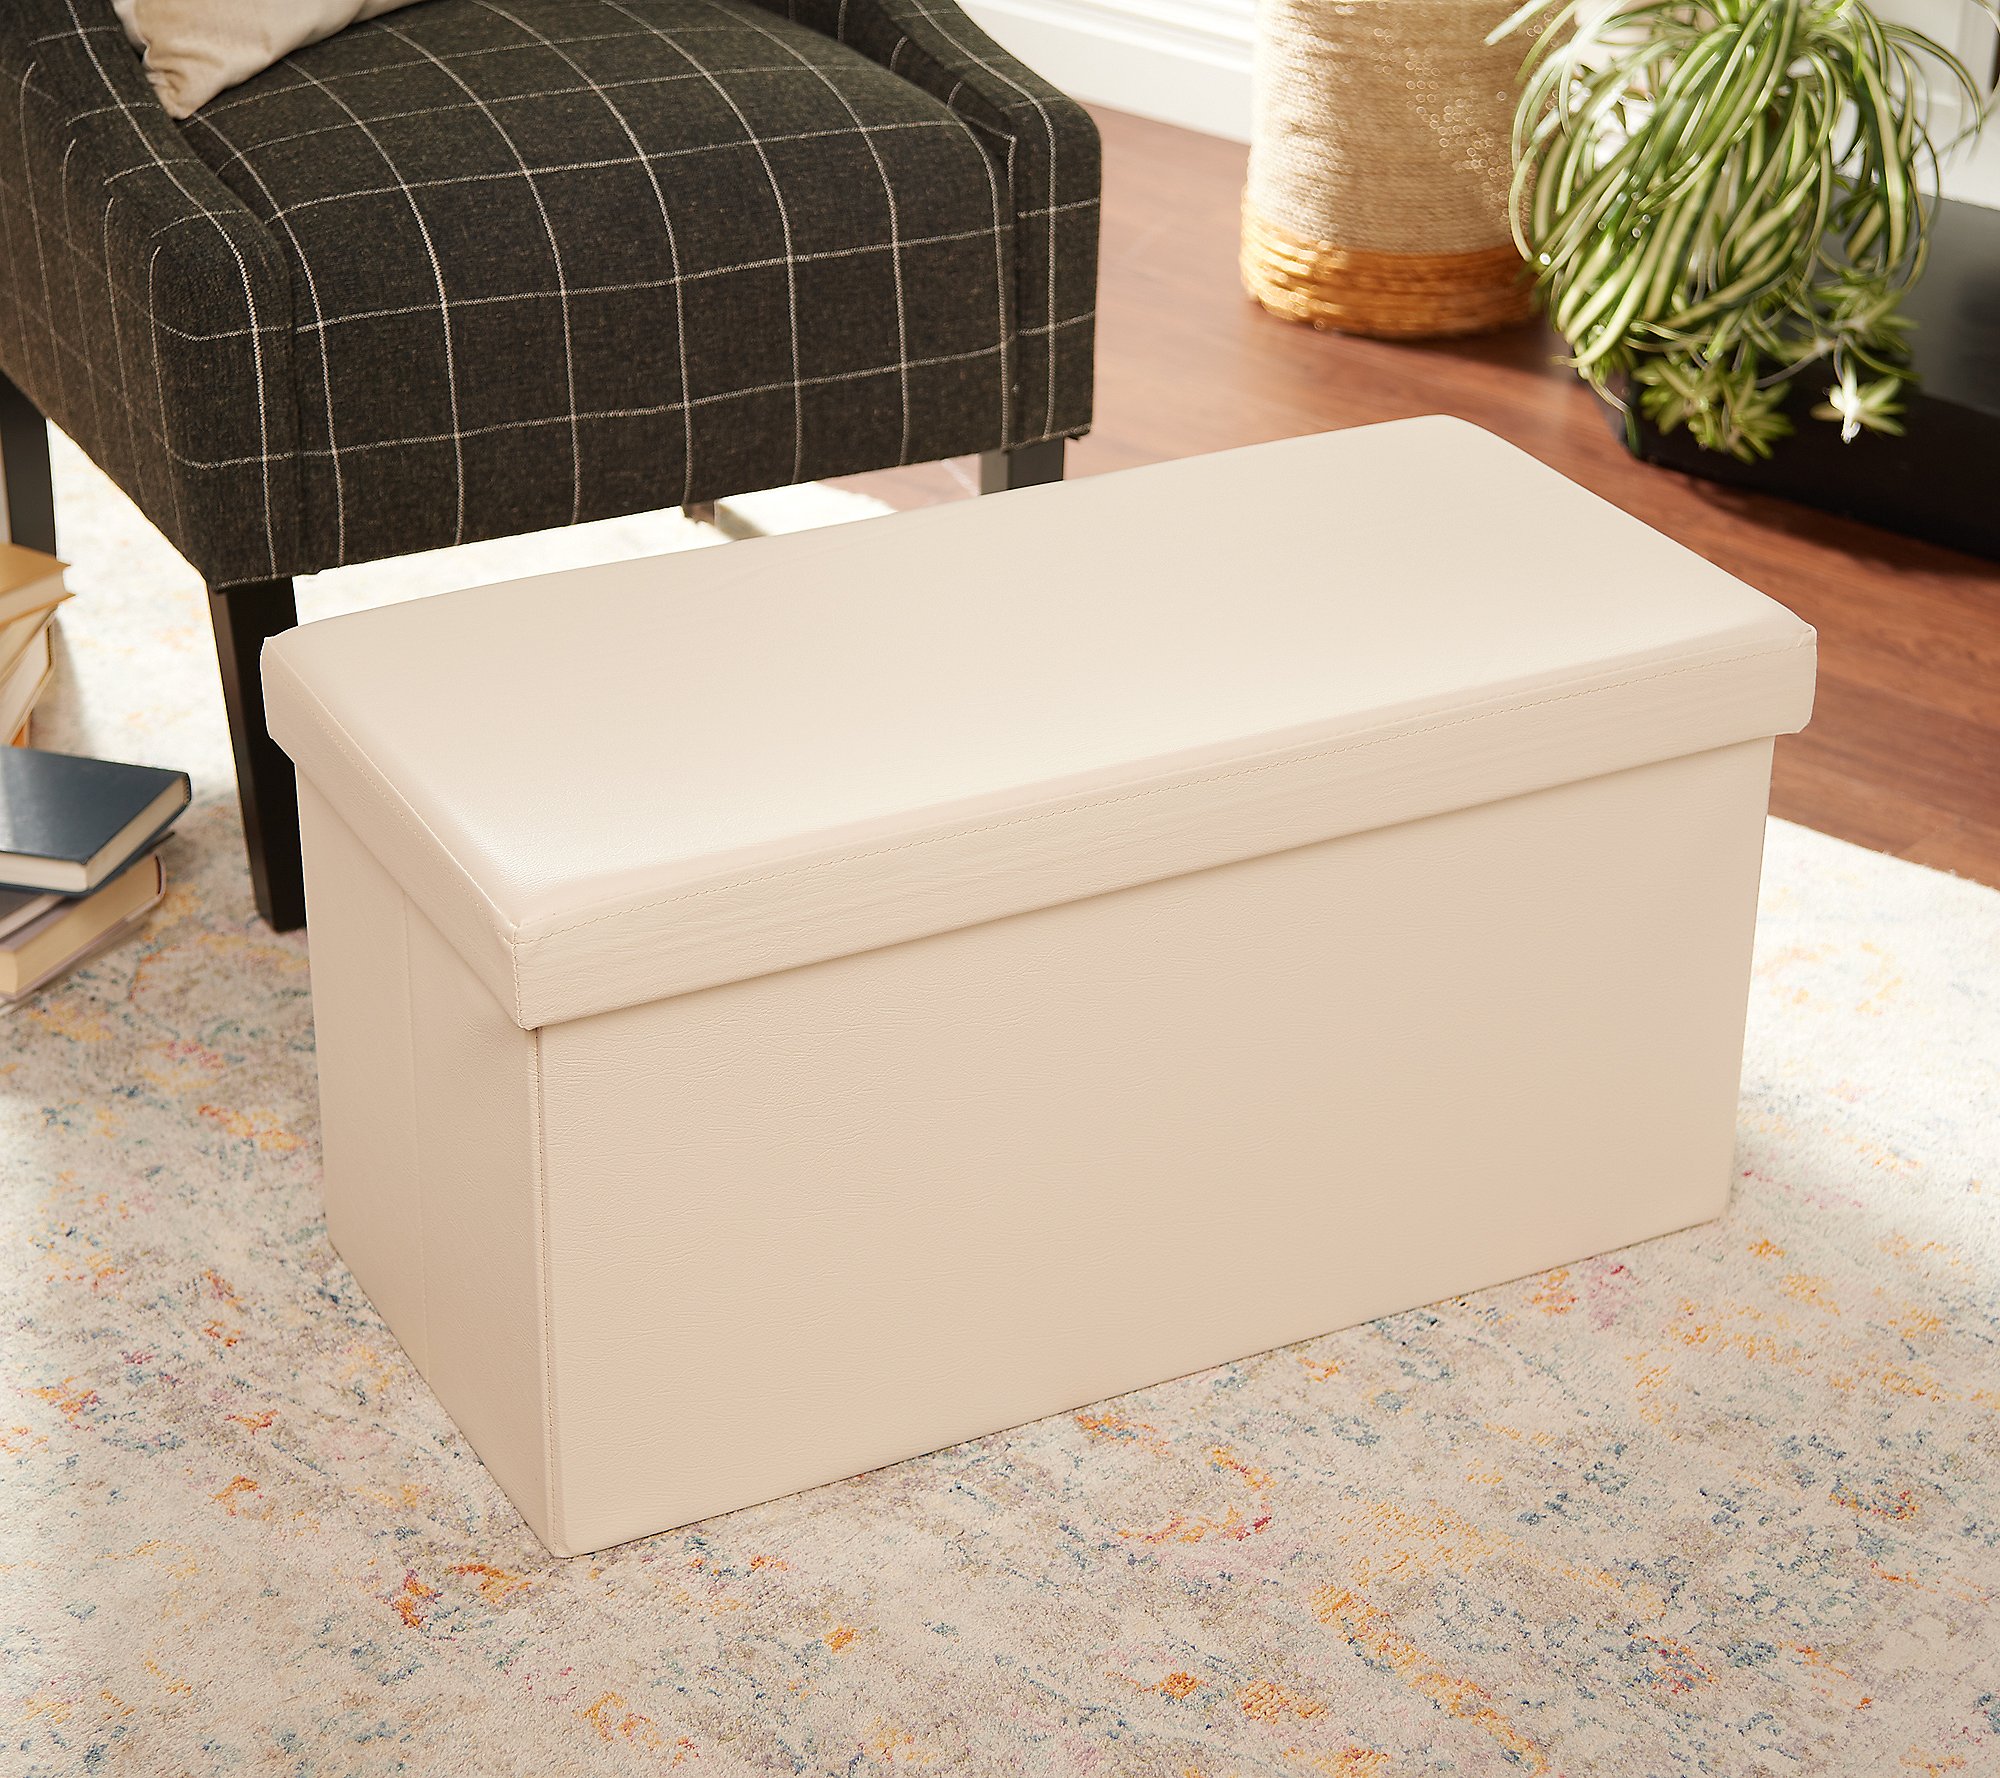 White home storage bench QVC Clearance Deals Online 